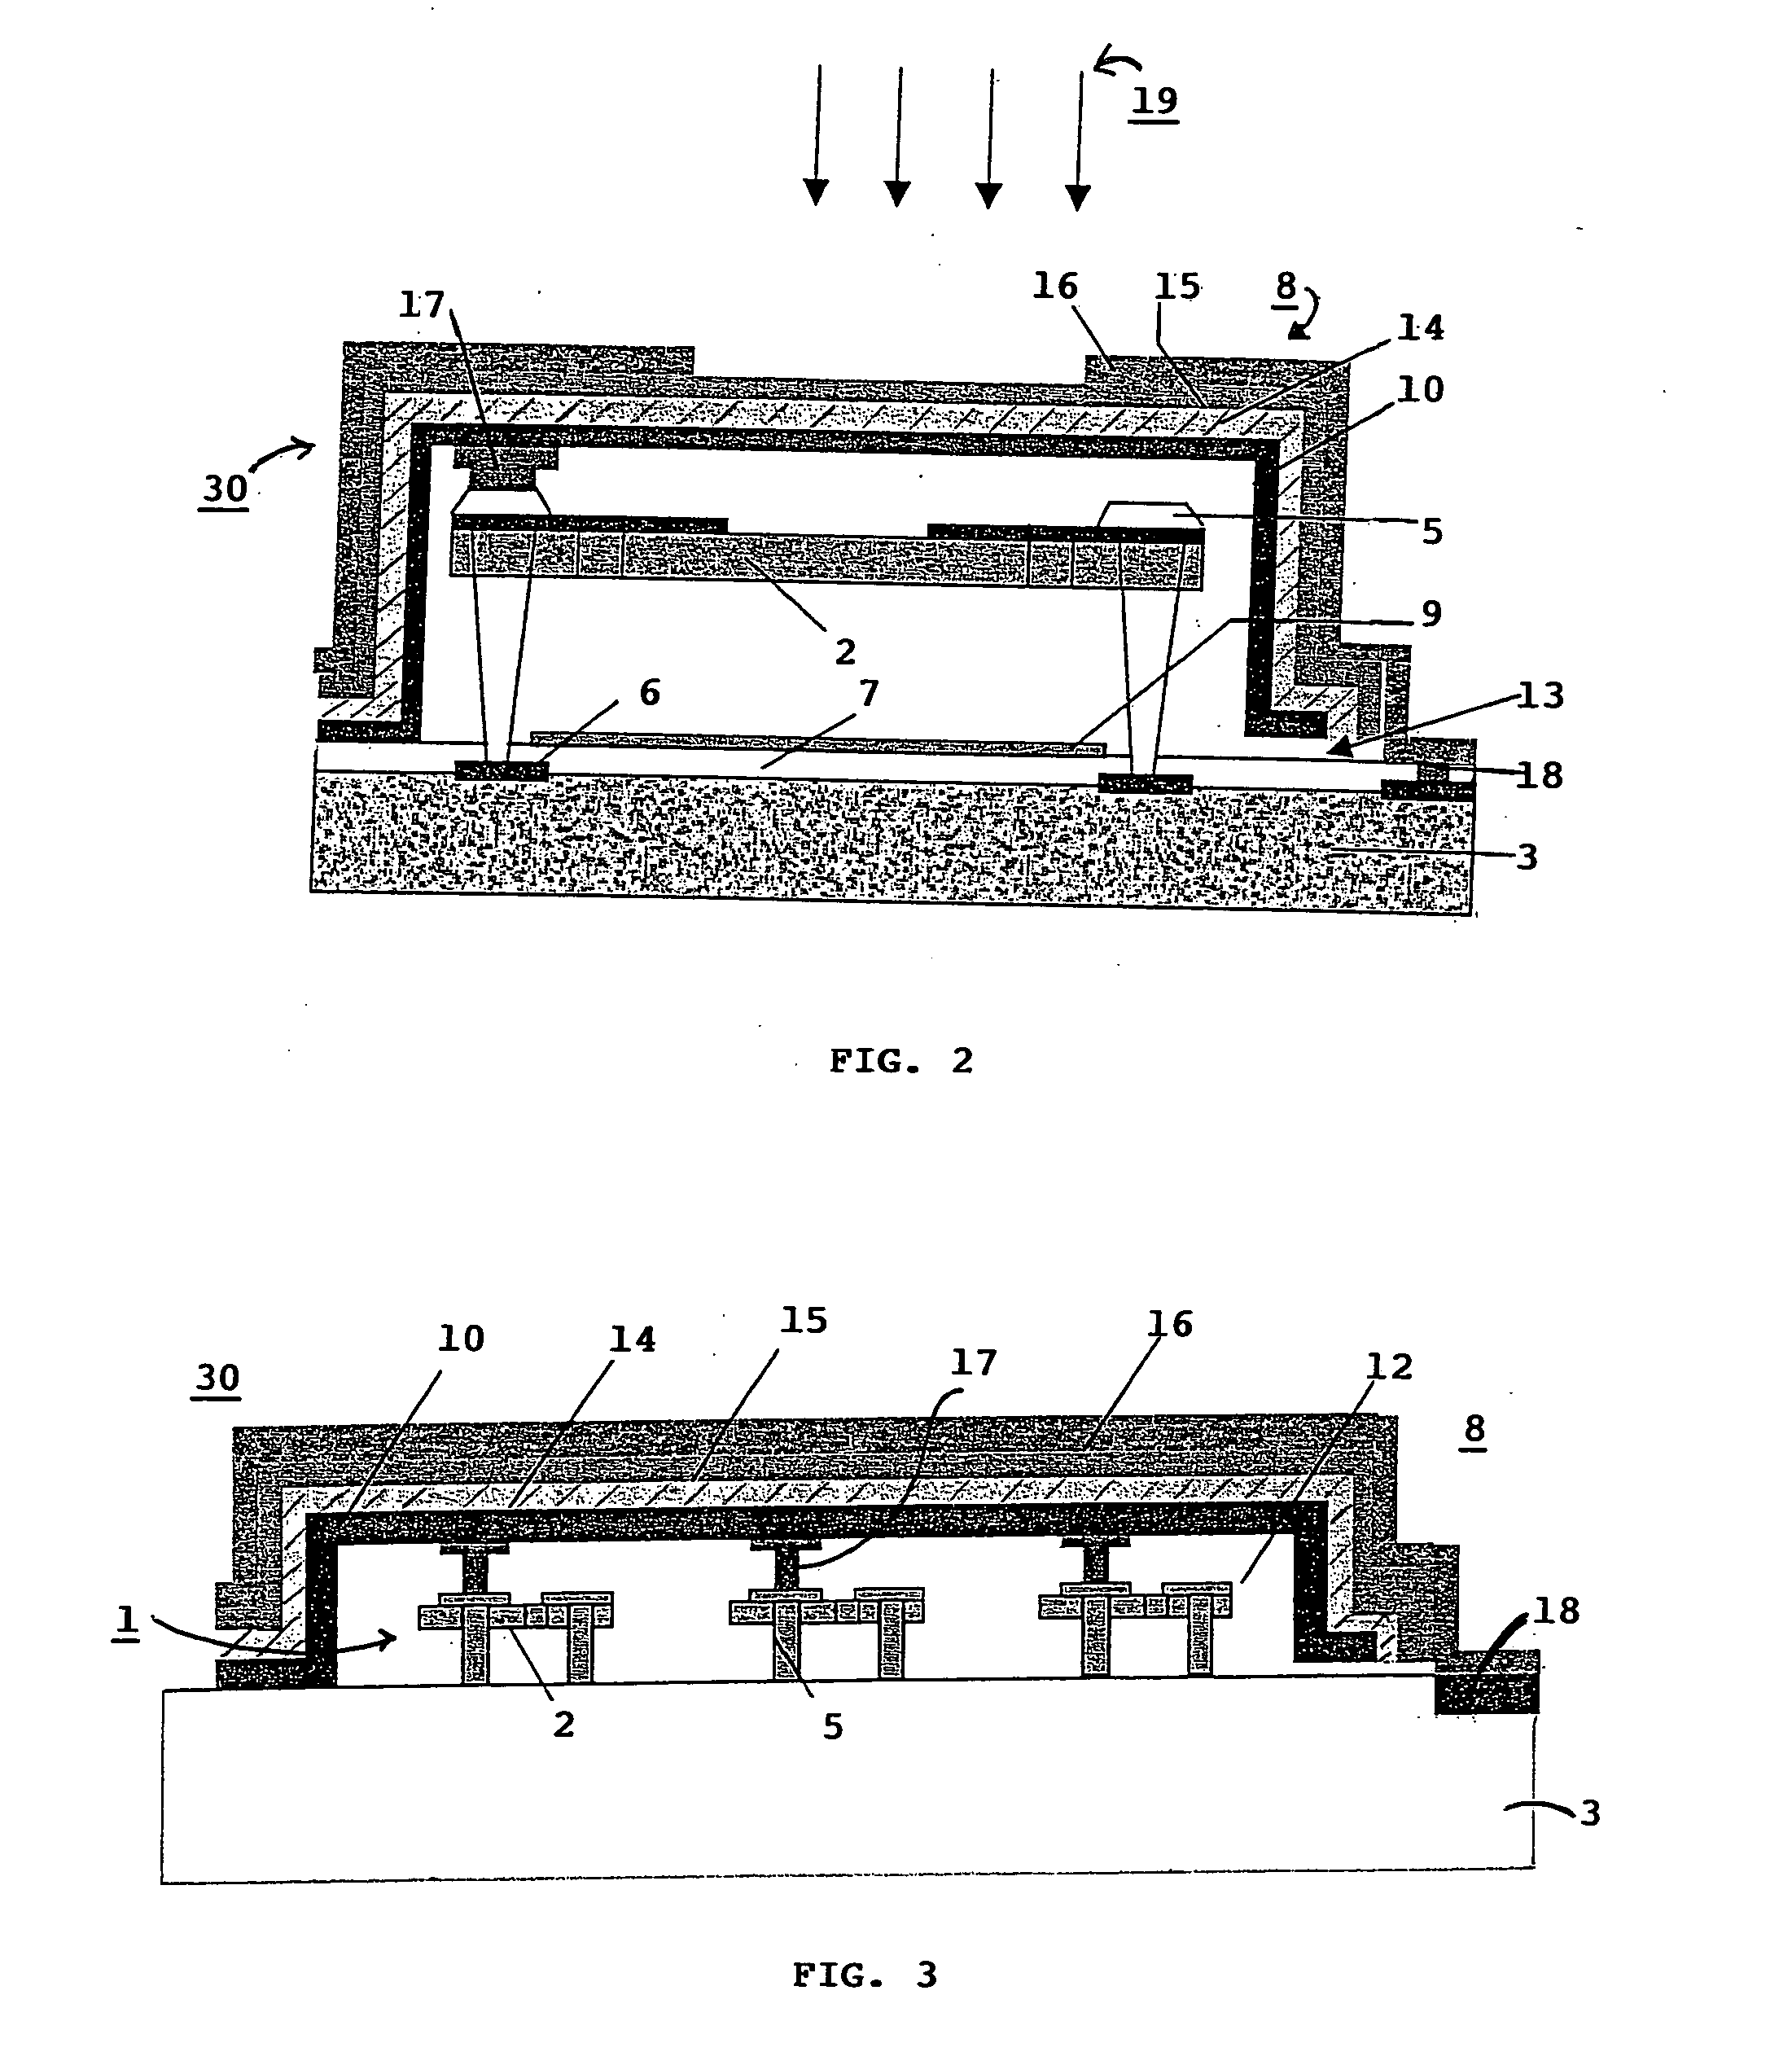 Electromagnetic radiation detection device with integrated housing comprising two superposed detectors